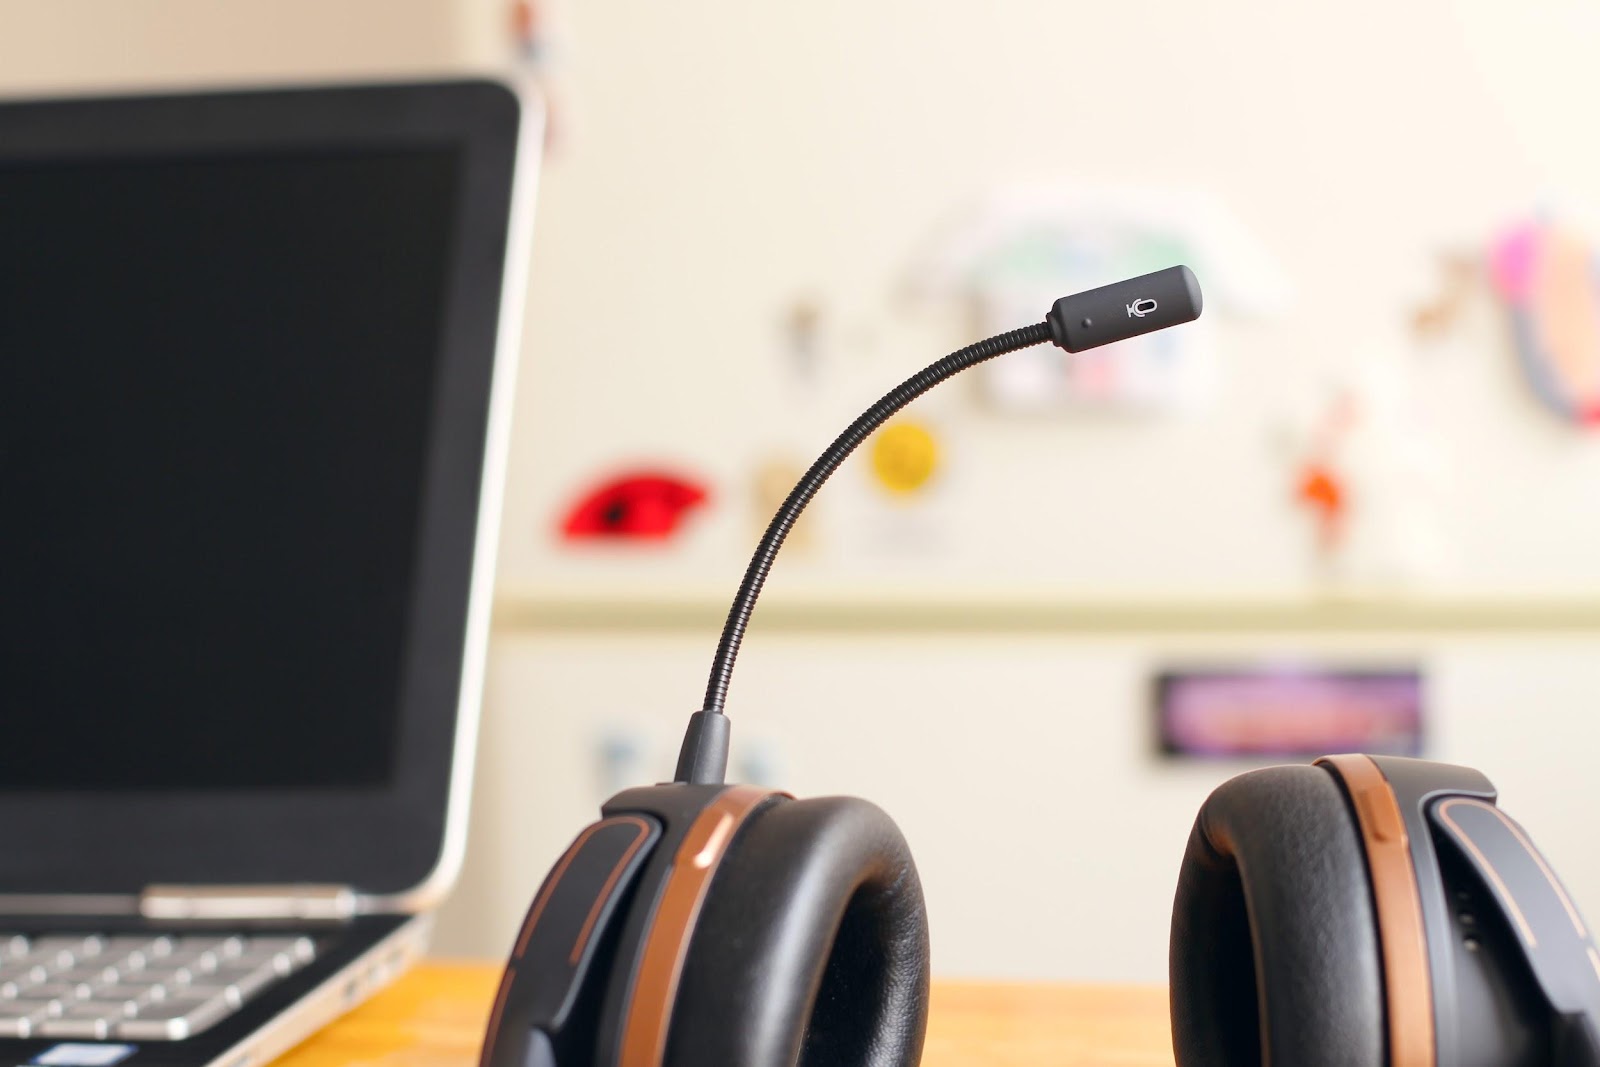 USB Headsets with a boom mic are the best for Zoom conferencing calls